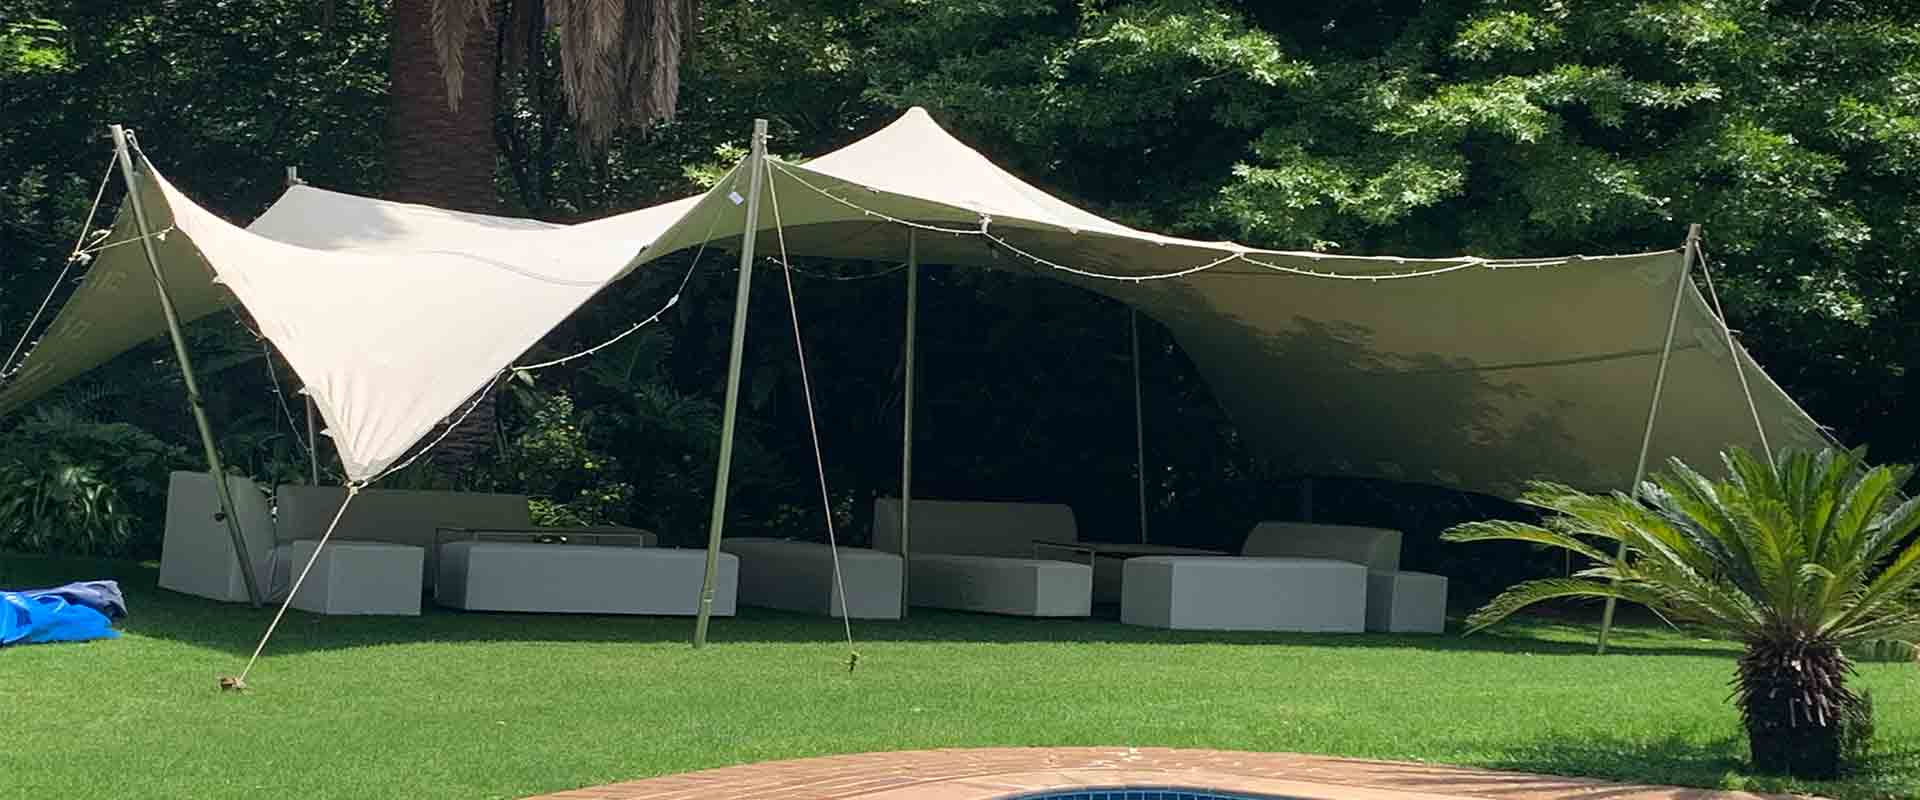 QUALITY STRETCH TENTS HIRE